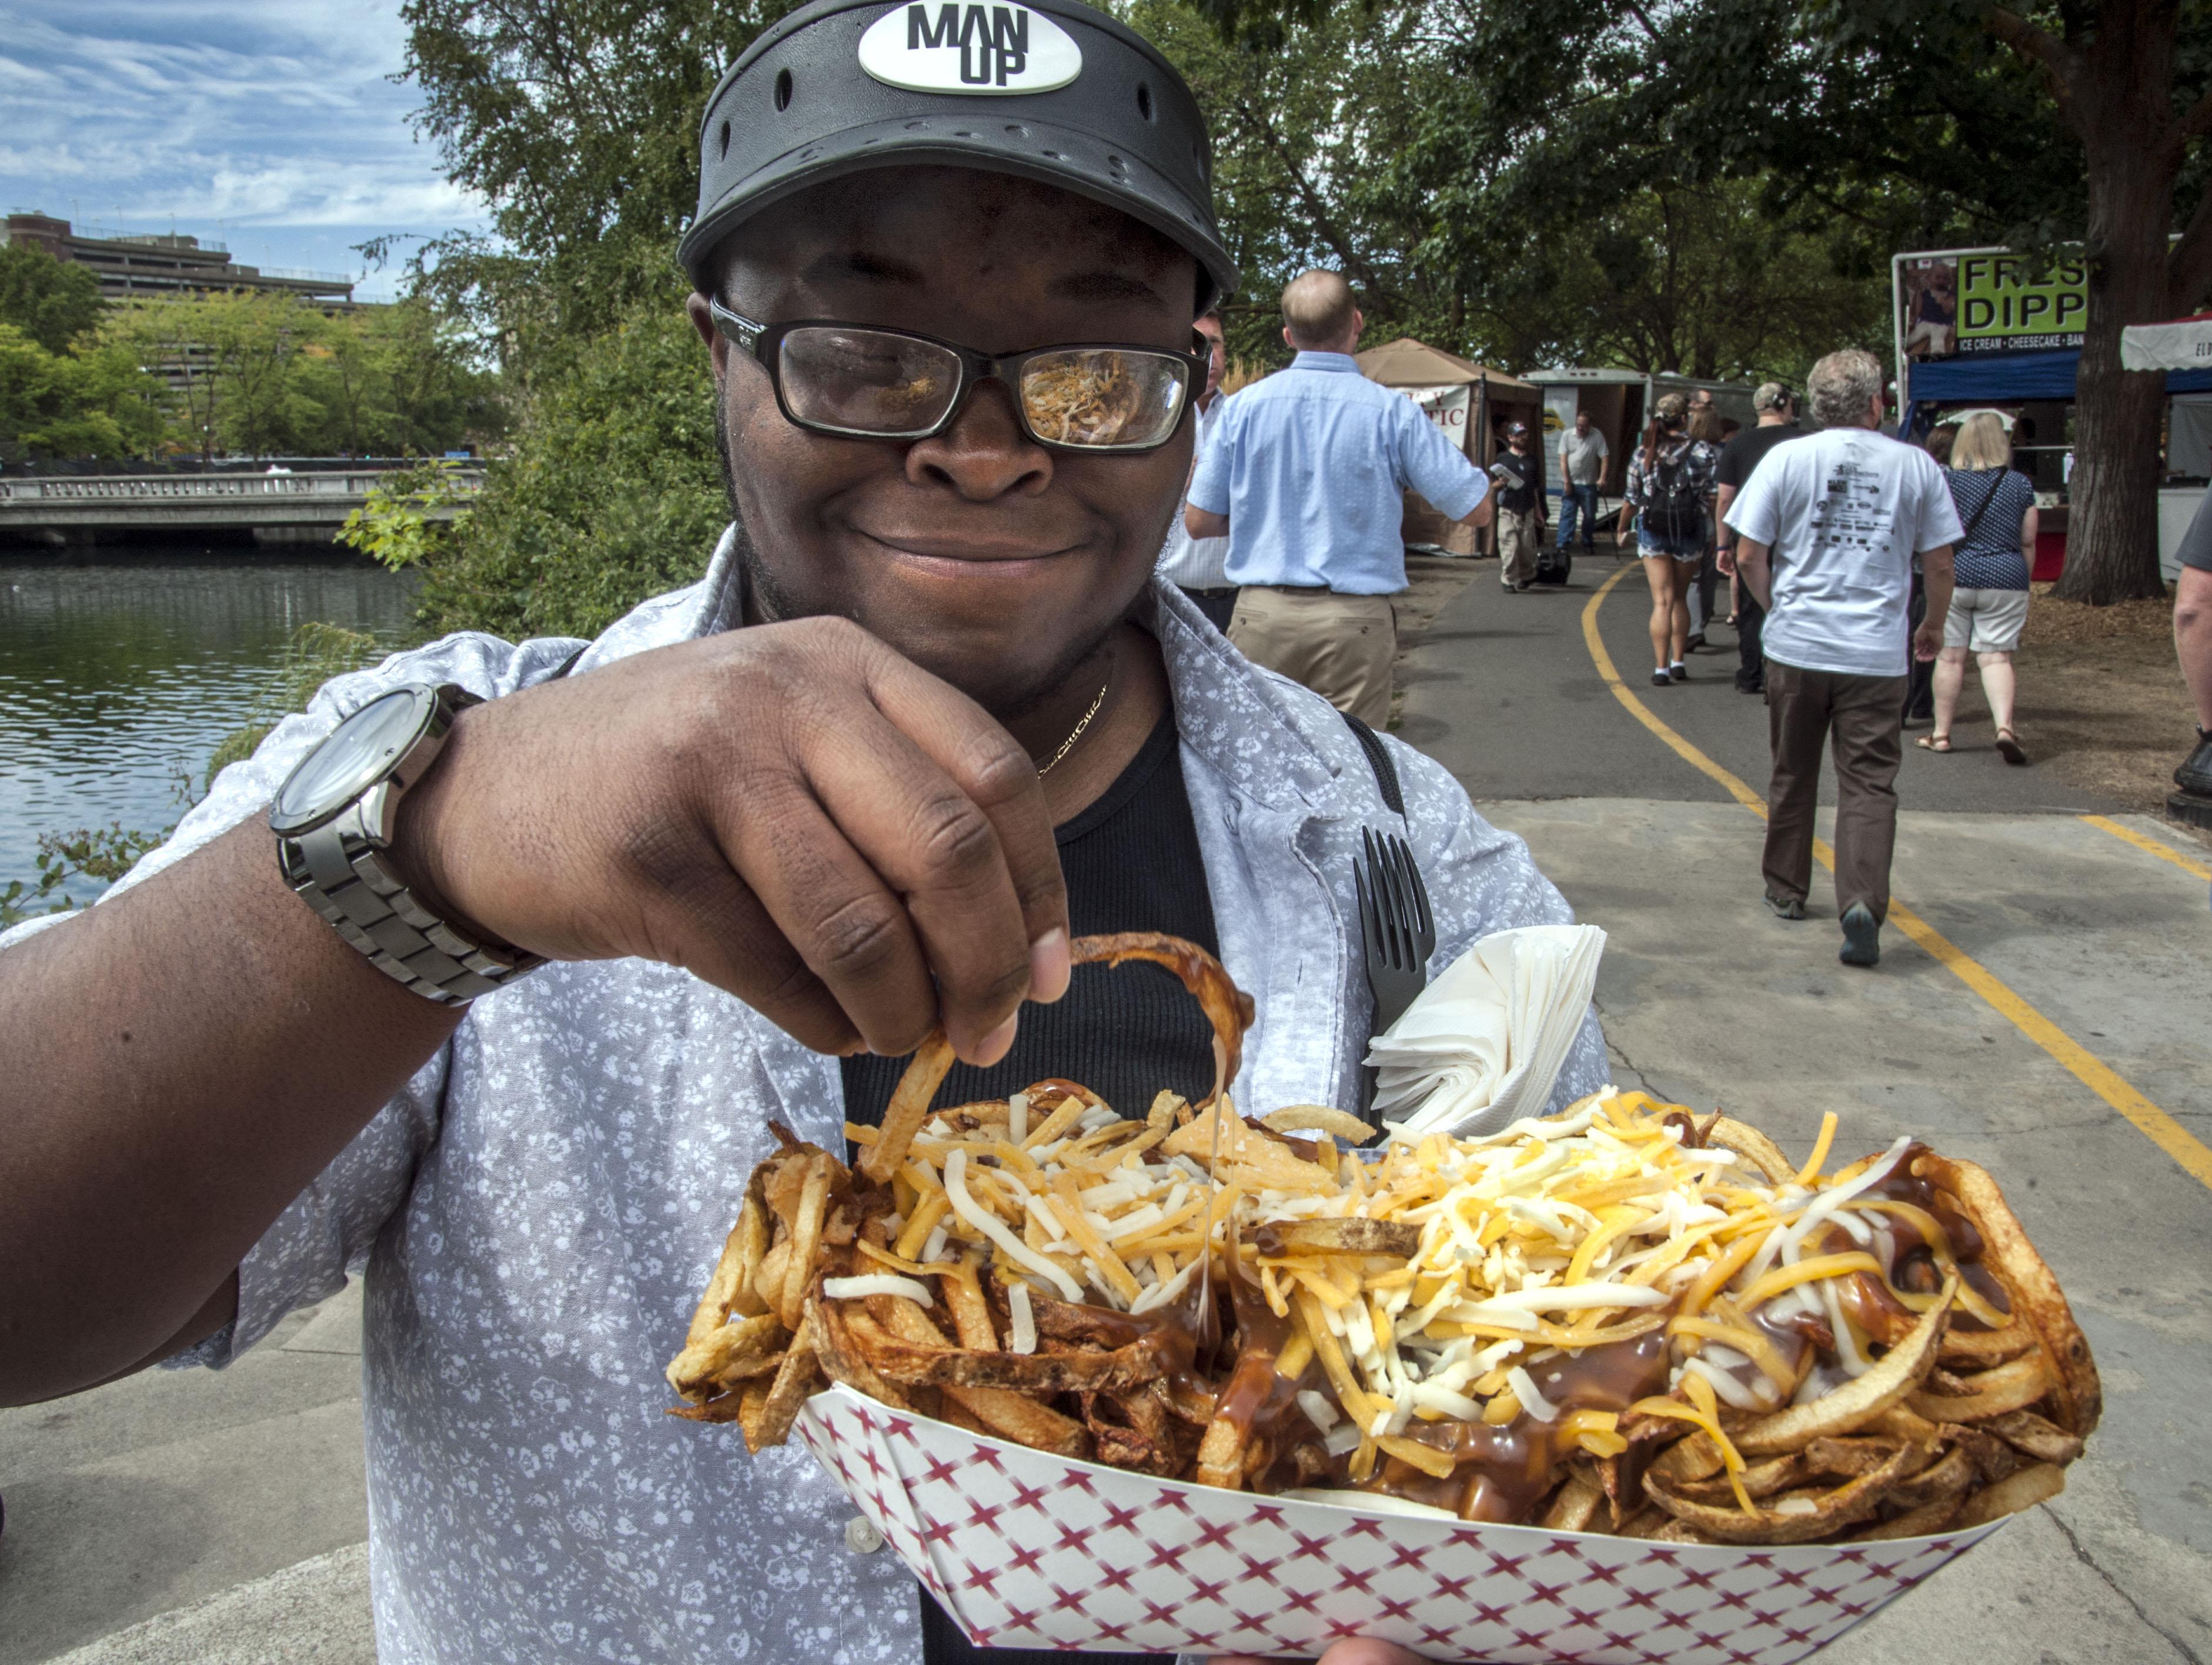 Pig Out in the Park 2016 The SpokesmanReview